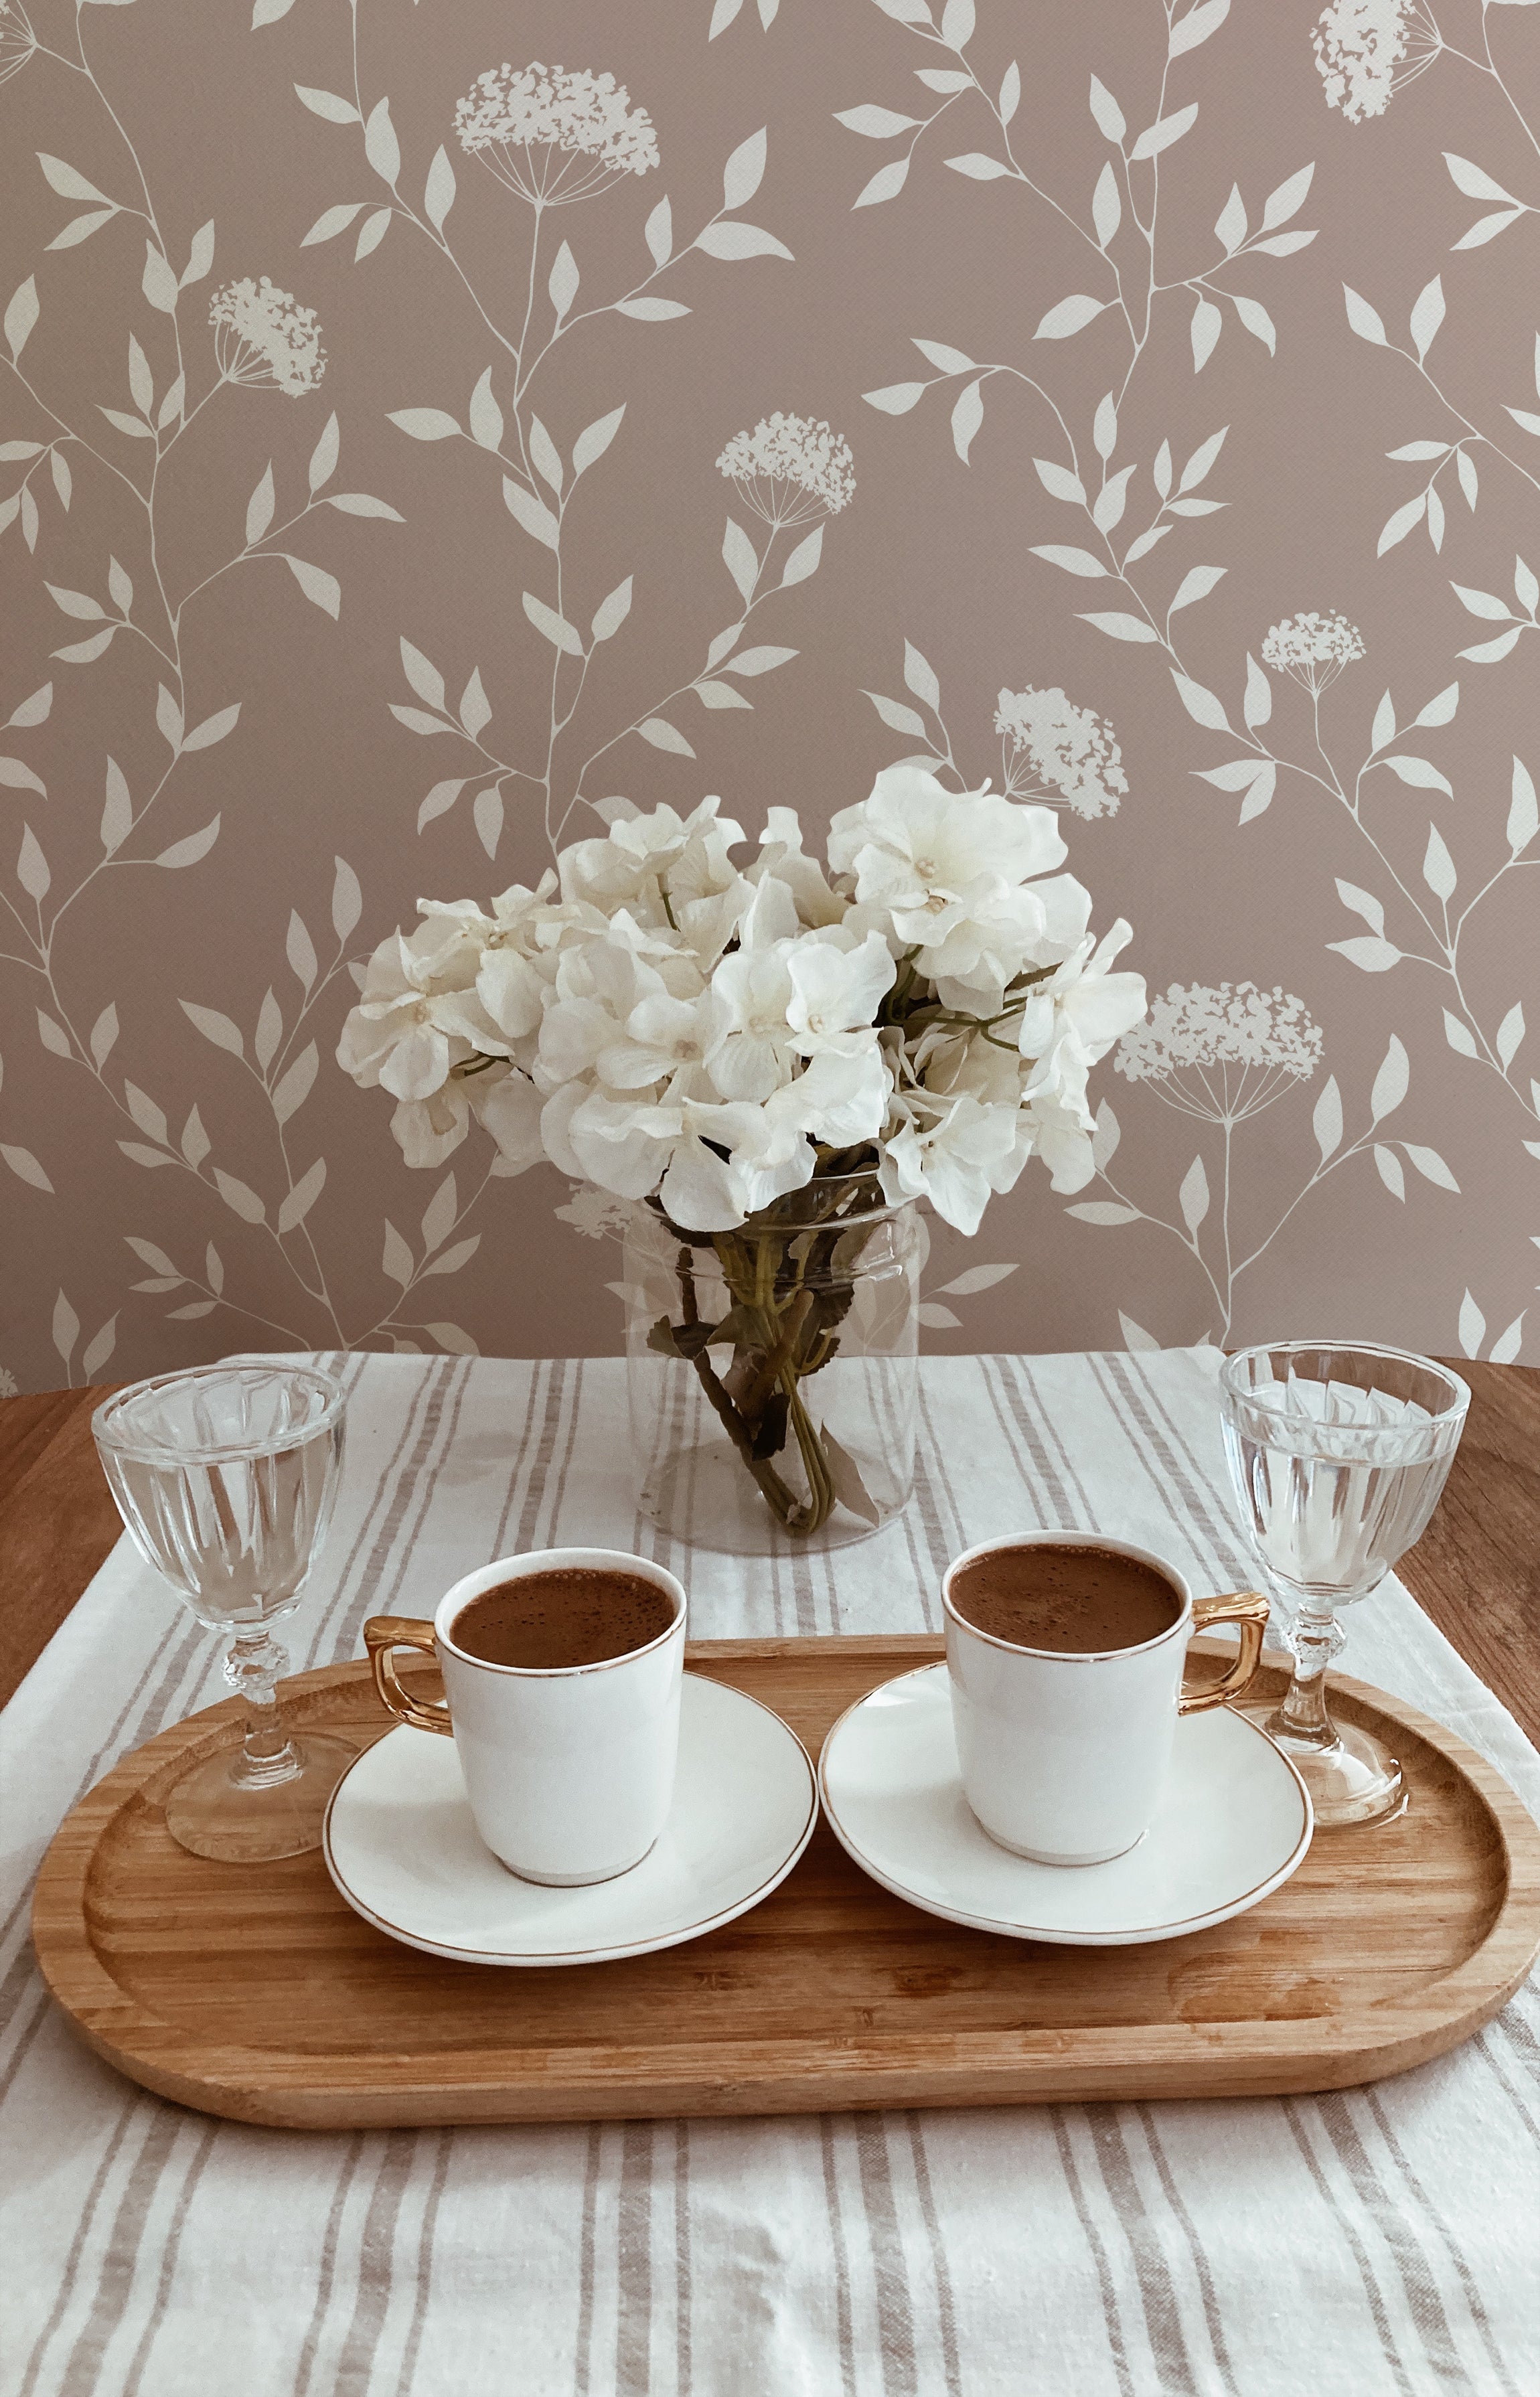 A cozy dining scene with a floral wallpaper in muted taupe, featuring elegant white flowers and delicate green foliage. A wooden tray on a table holds two cups of coffee and a vase with white blooms, enhancing the room's serene and inviting atmosphere.